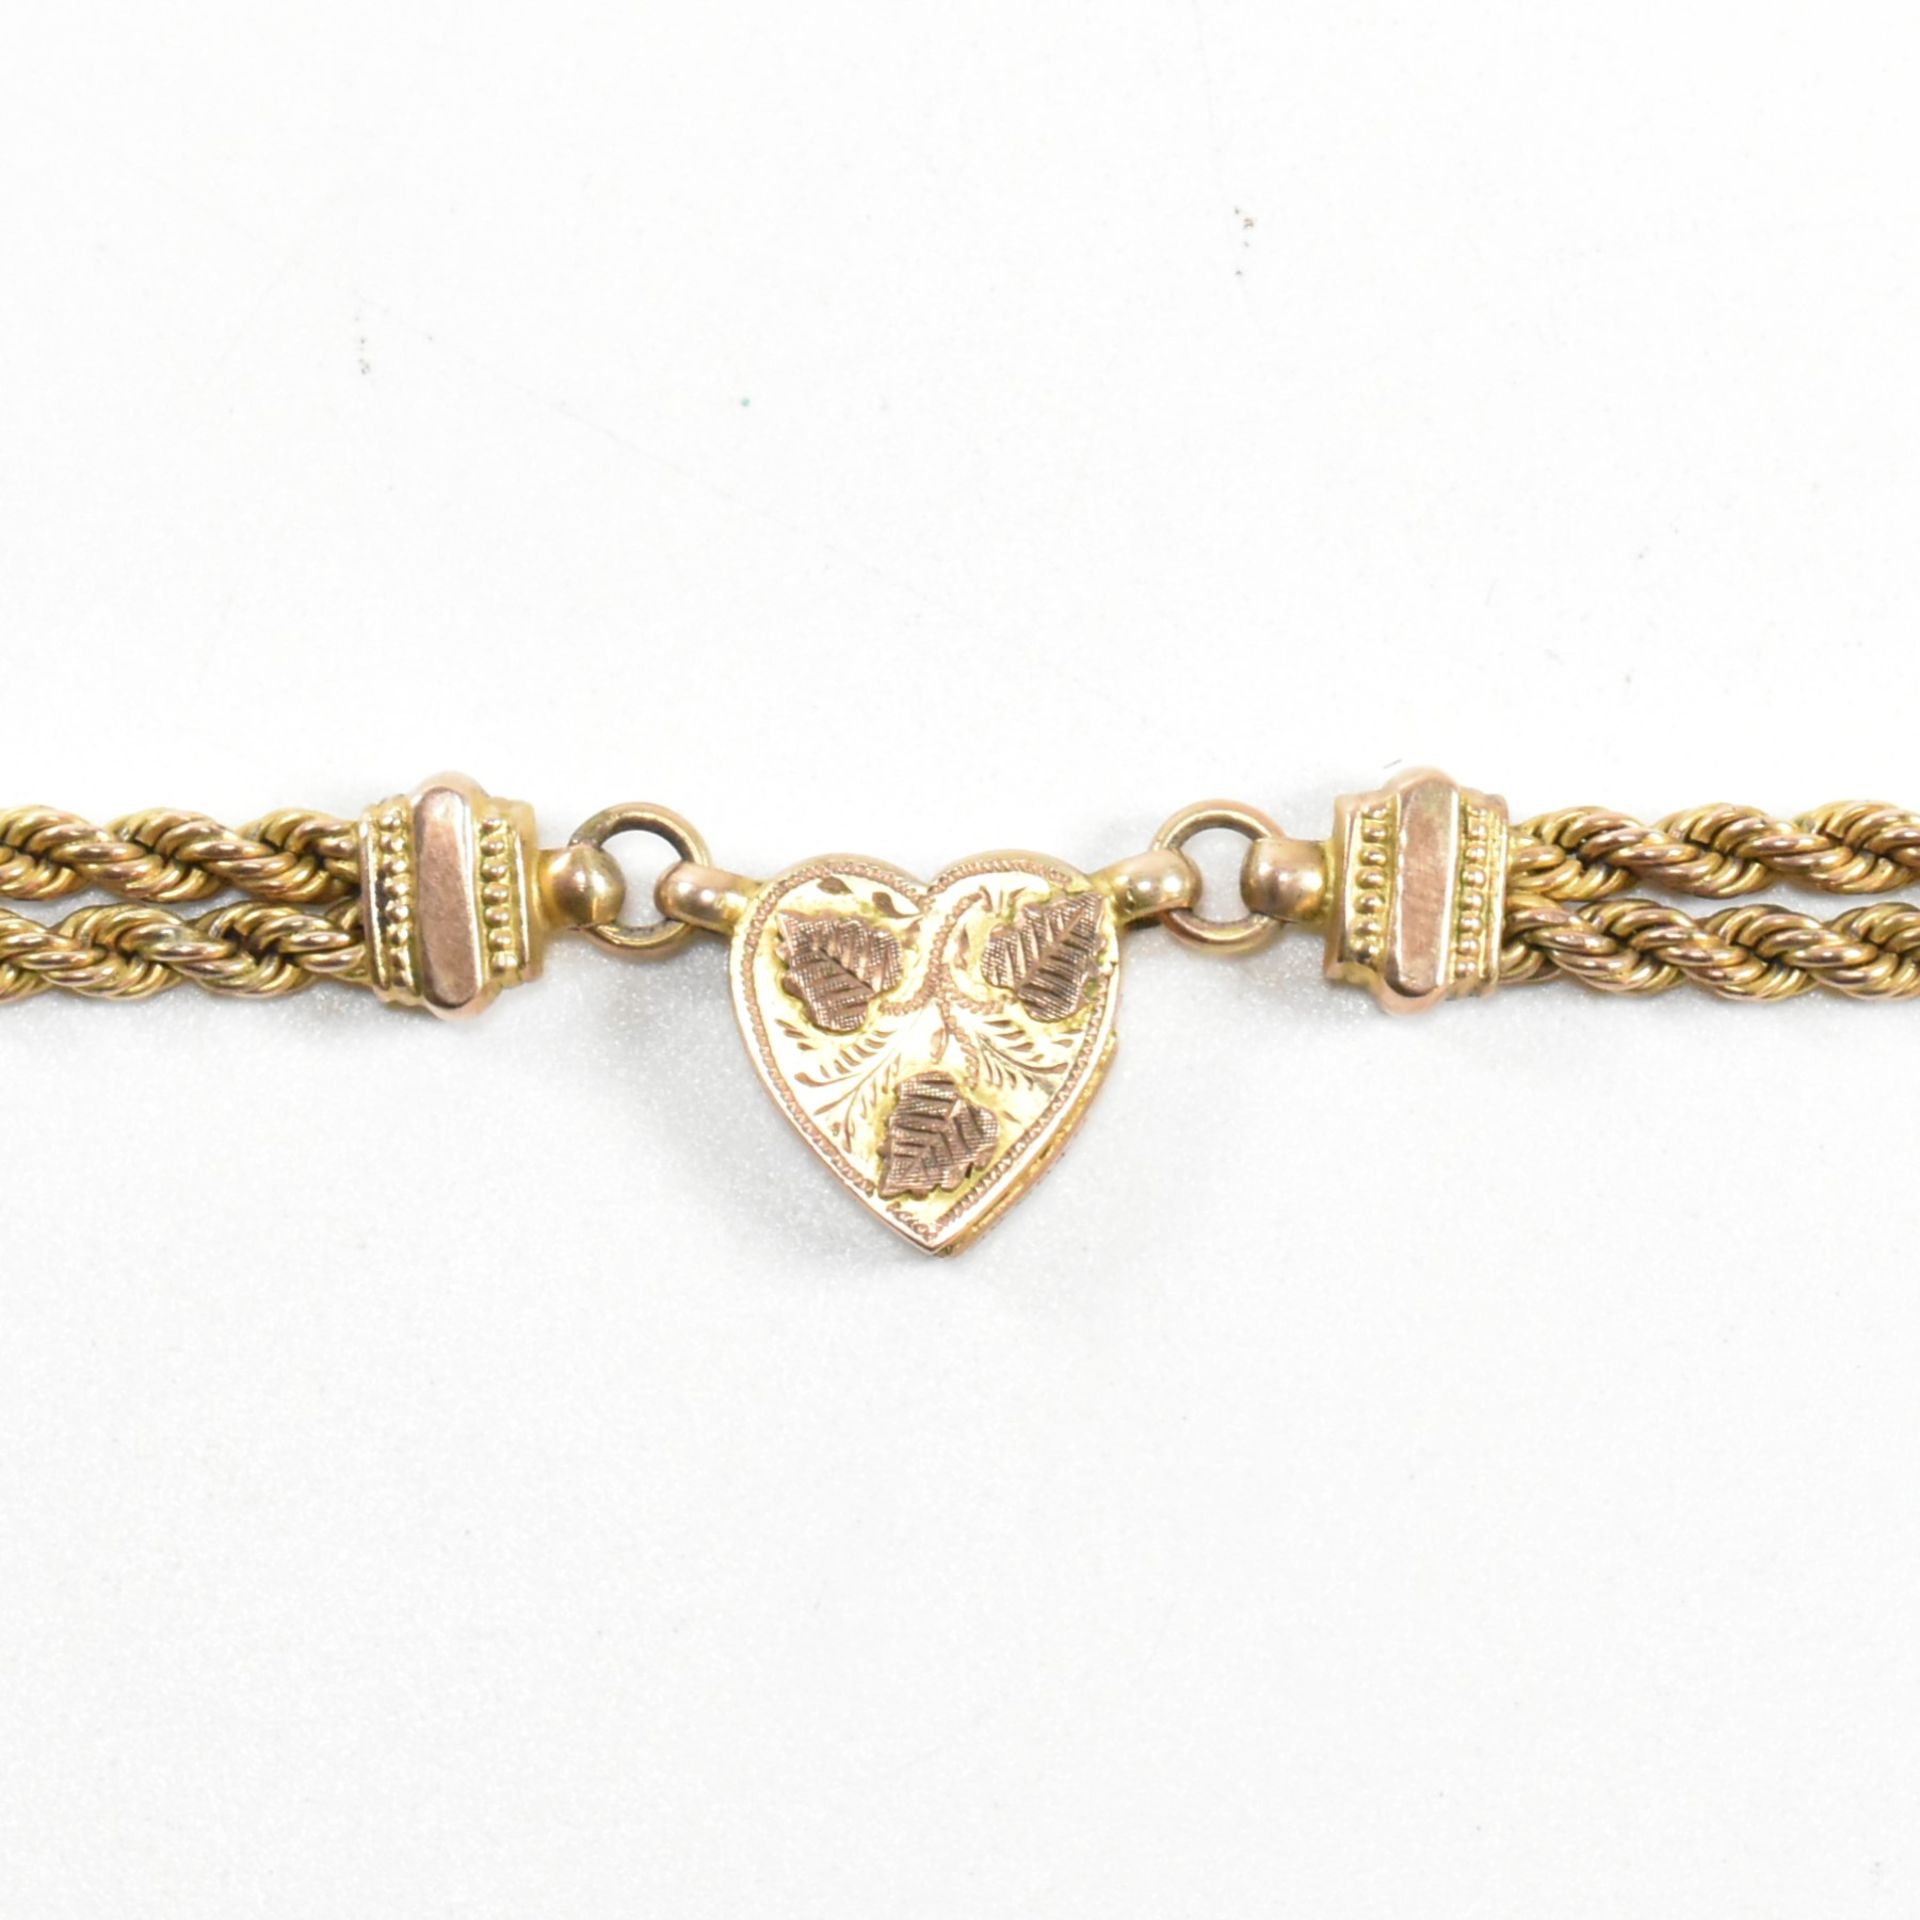 VICTORIAN 9CT GOLD LEONTINE WATCH CHAIN - Image 2 of 7